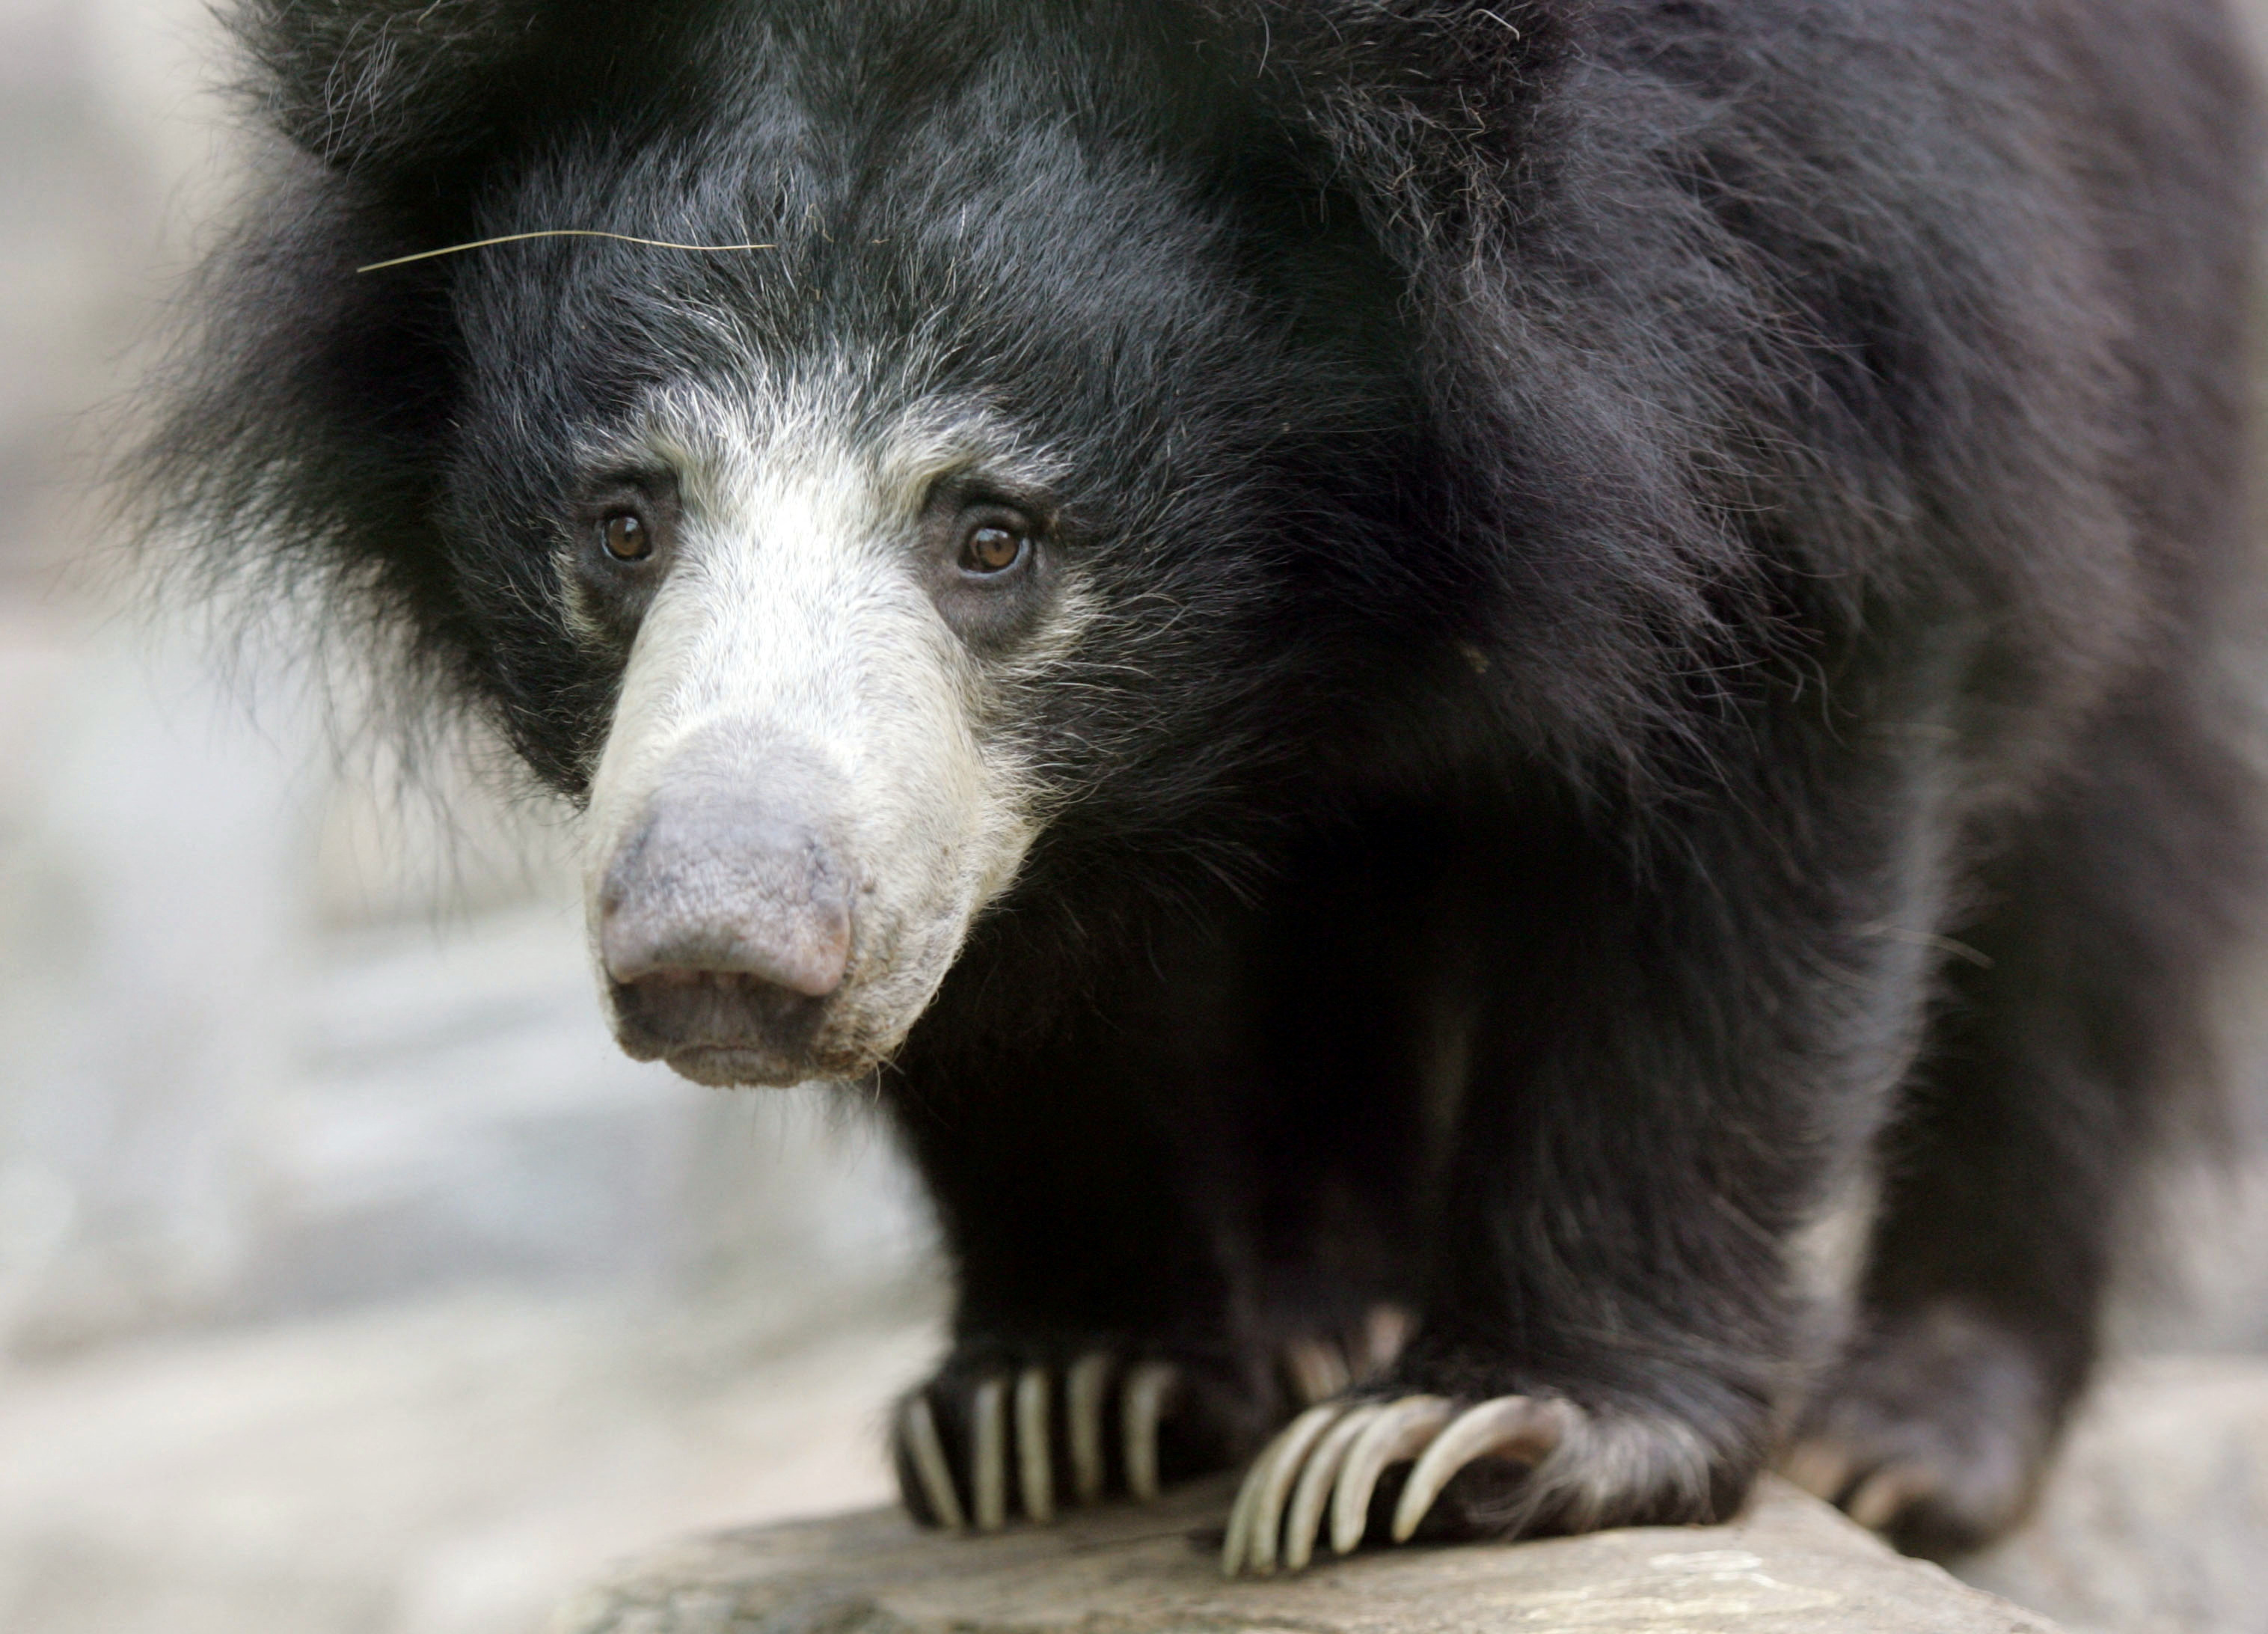 Hana, a female sloth bear, inspects her new home at the Asia Trail area of the National Zoo in Washington